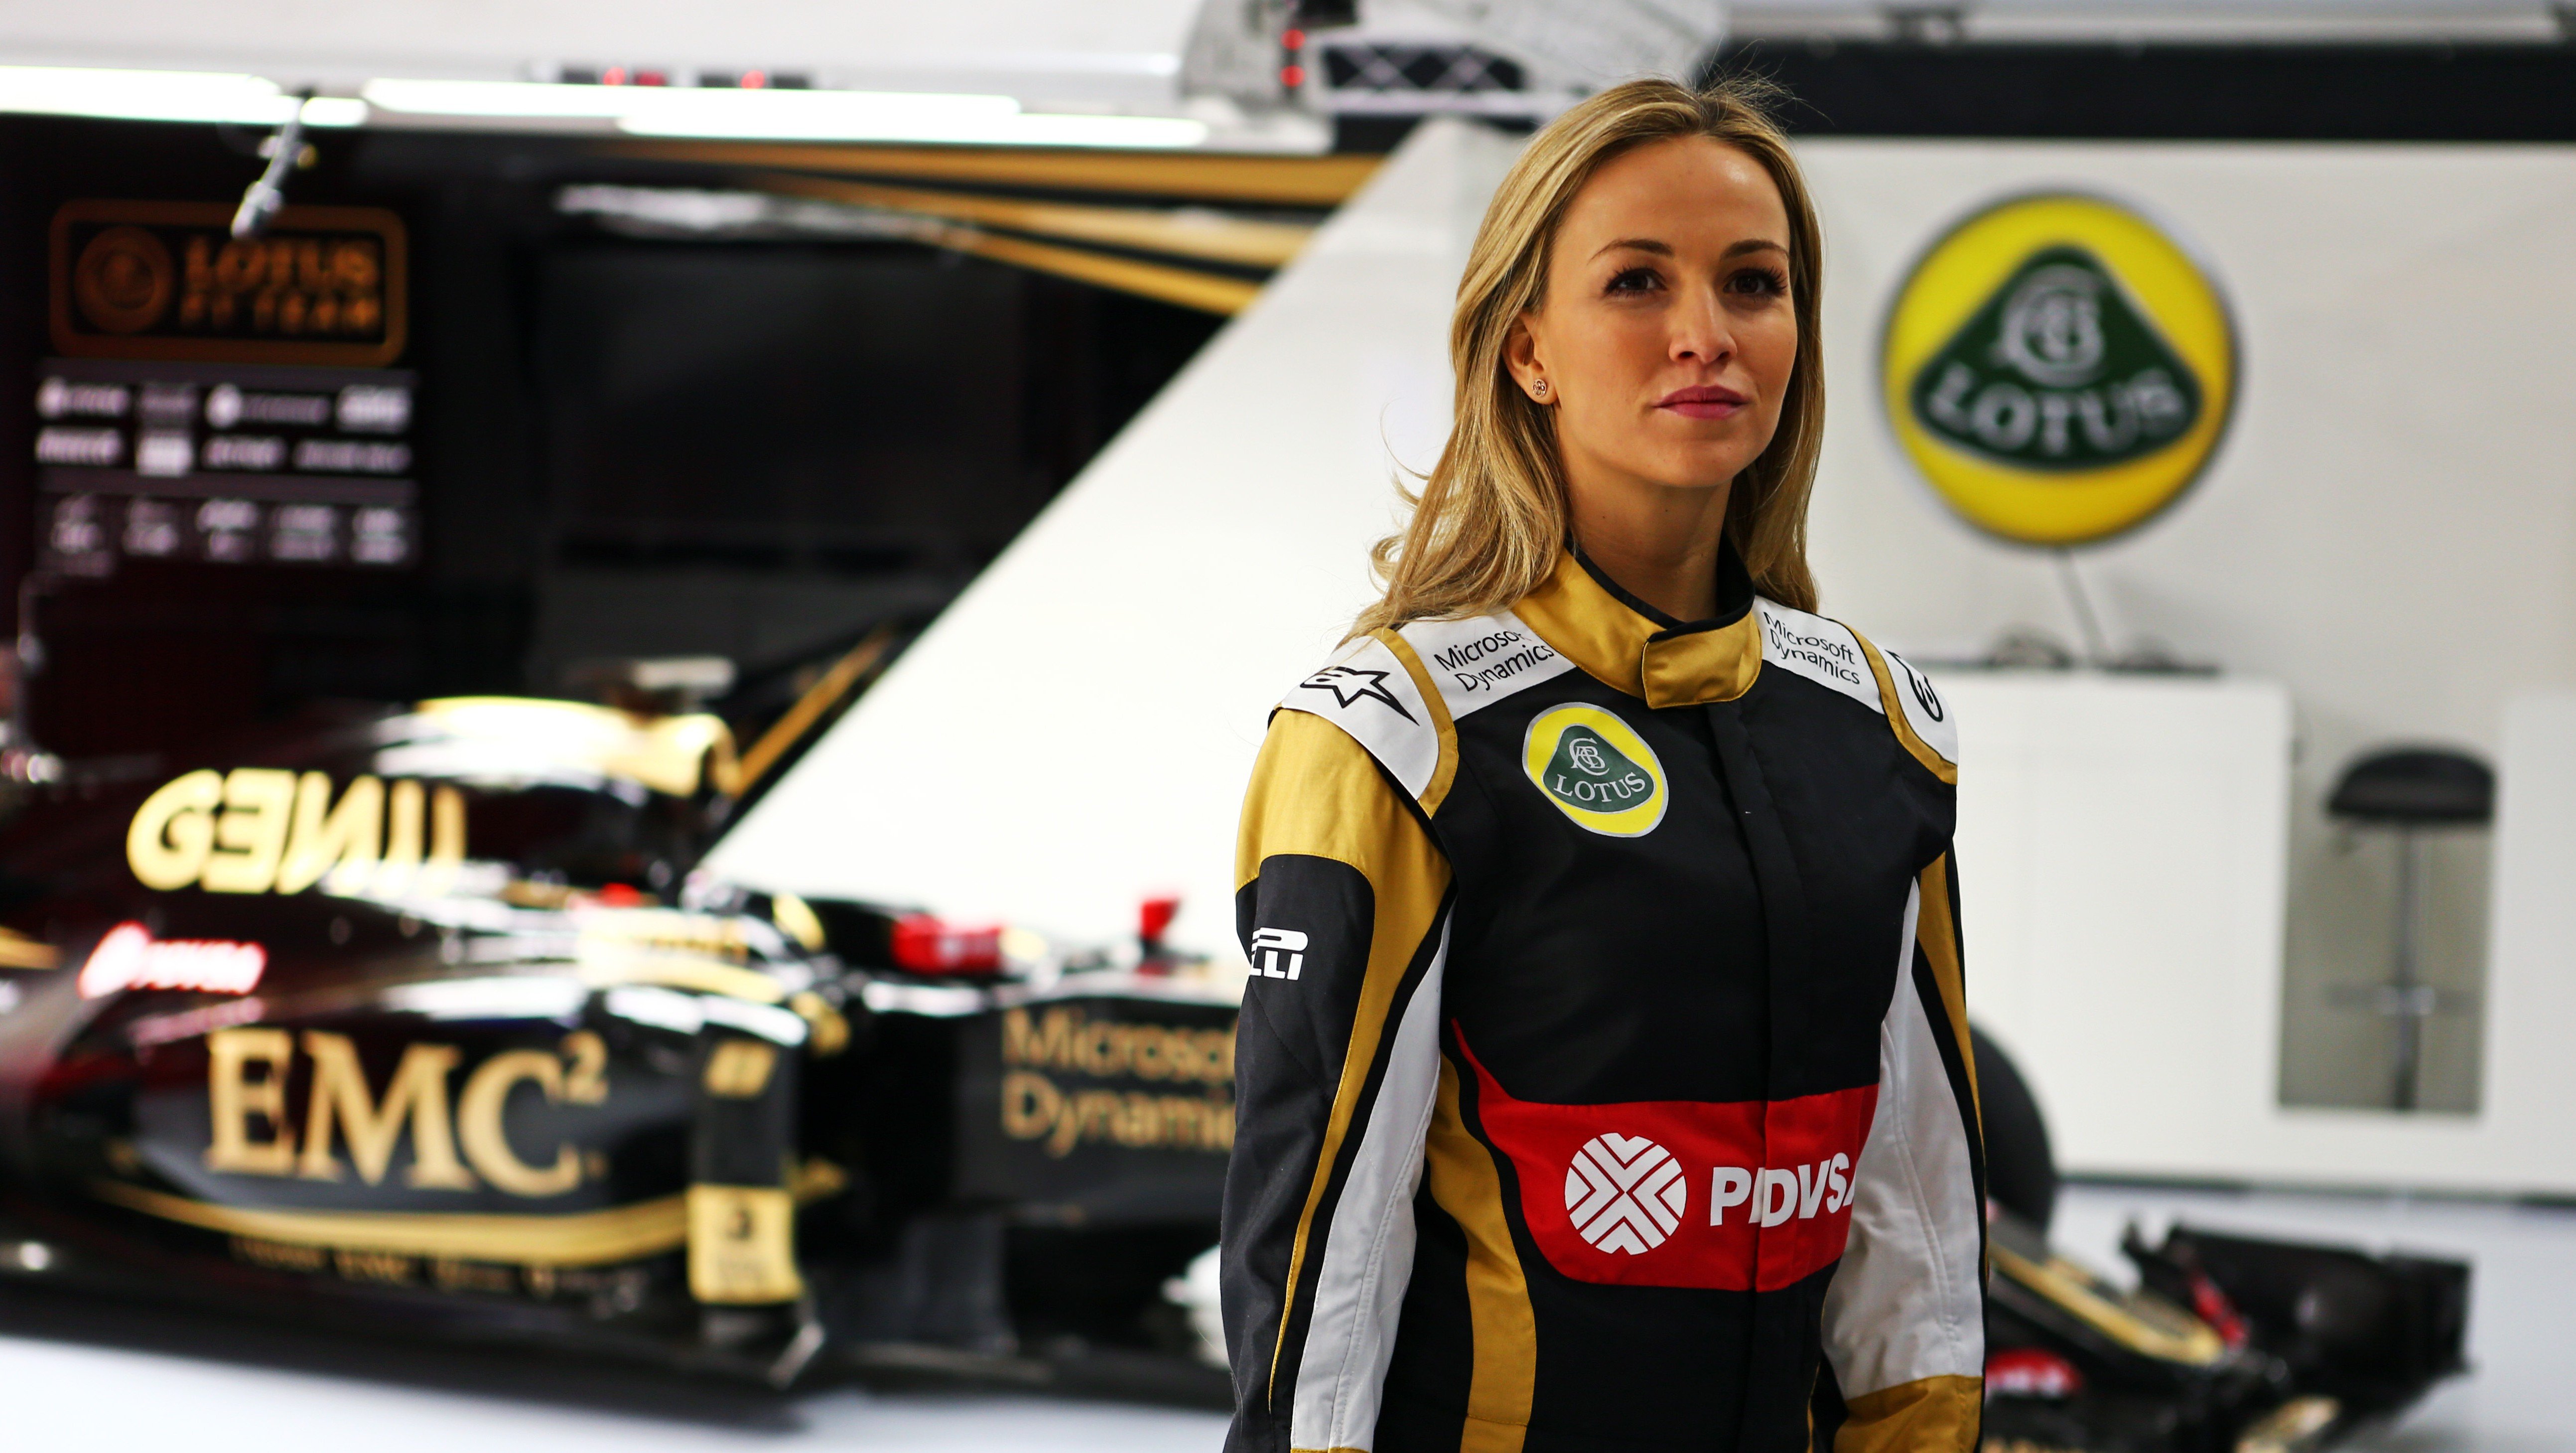 Lotus Formula One team appoints female driver Photos (1 of 8)